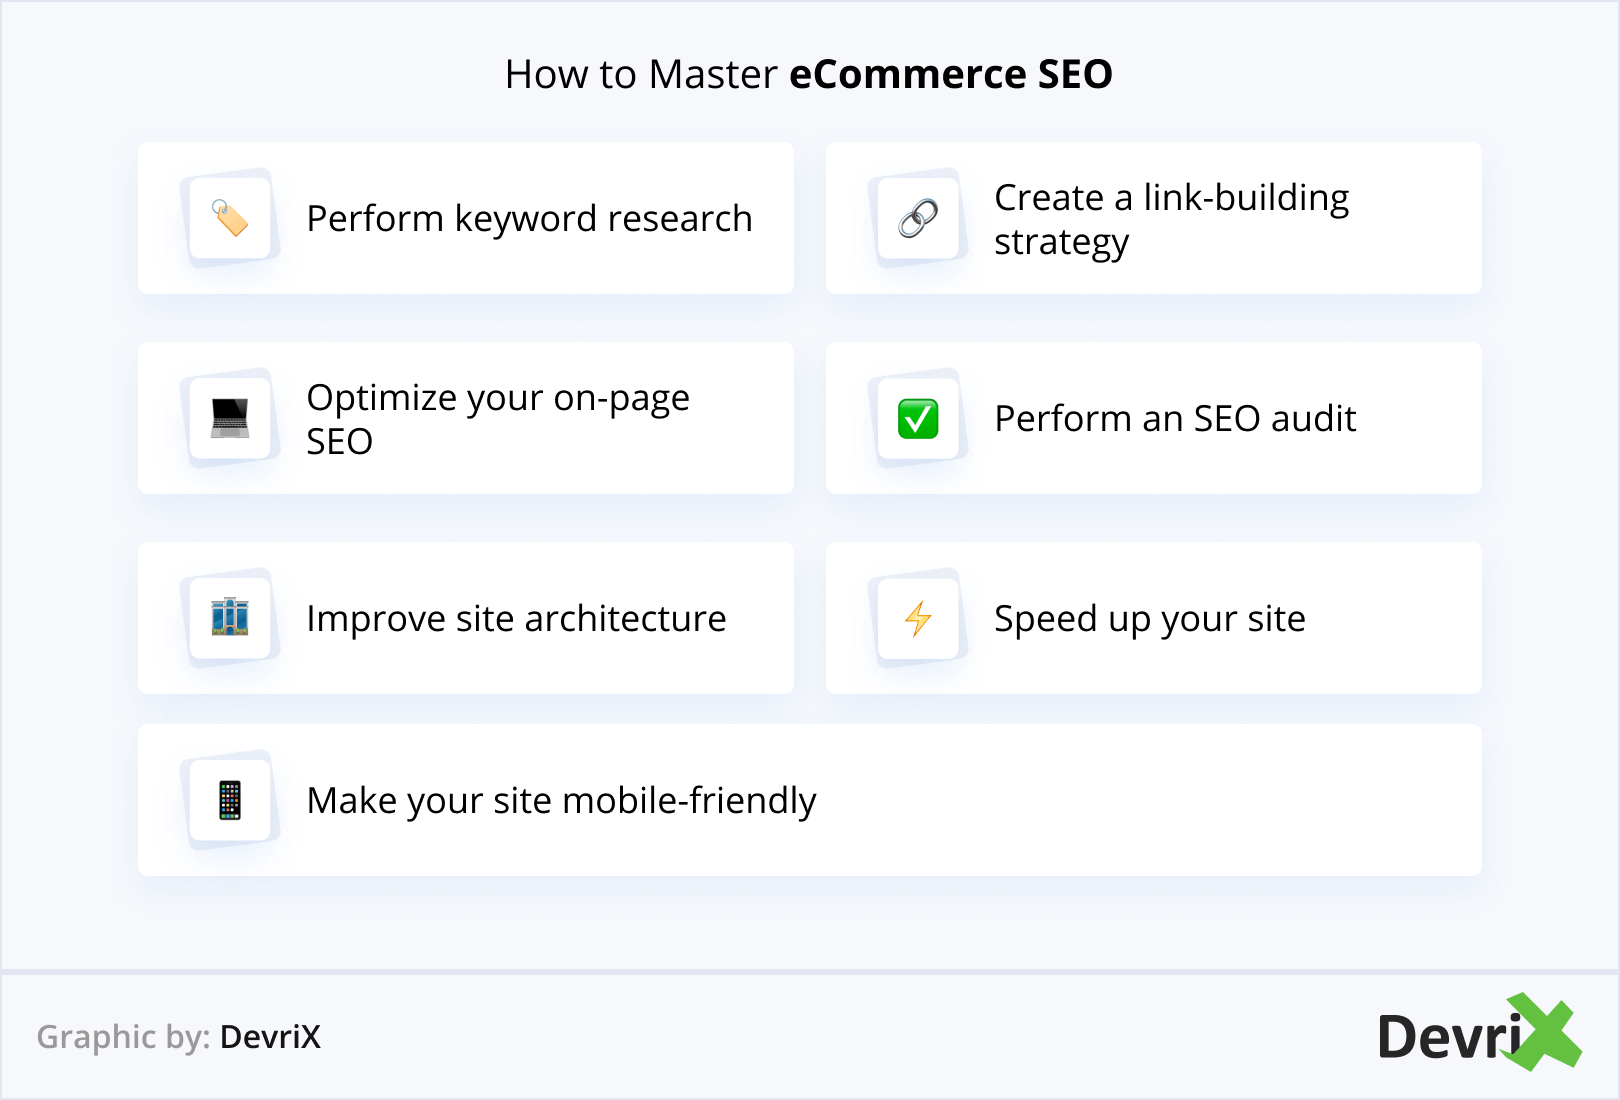 How to Master eCommerce SEO